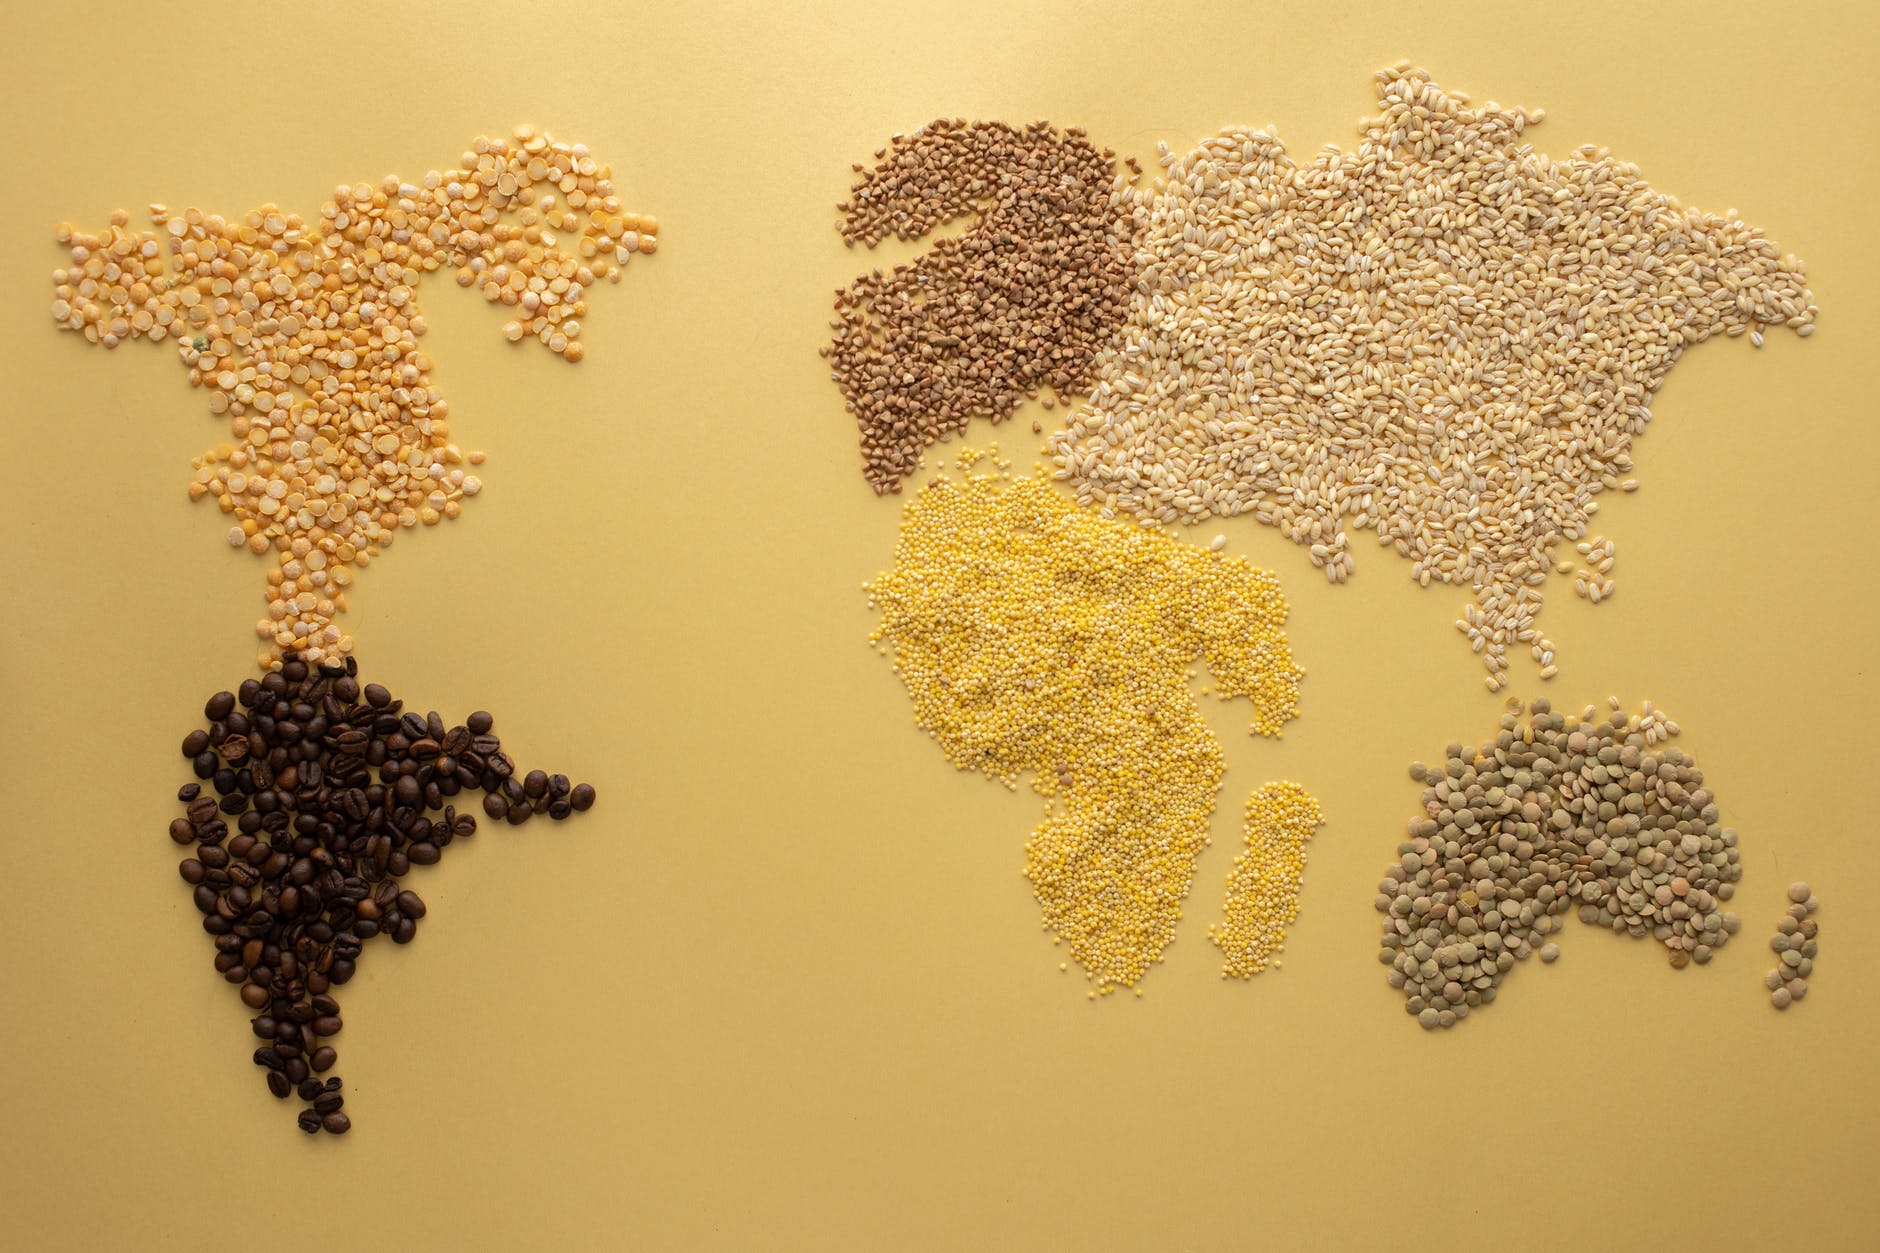 a world map made of grains and beans